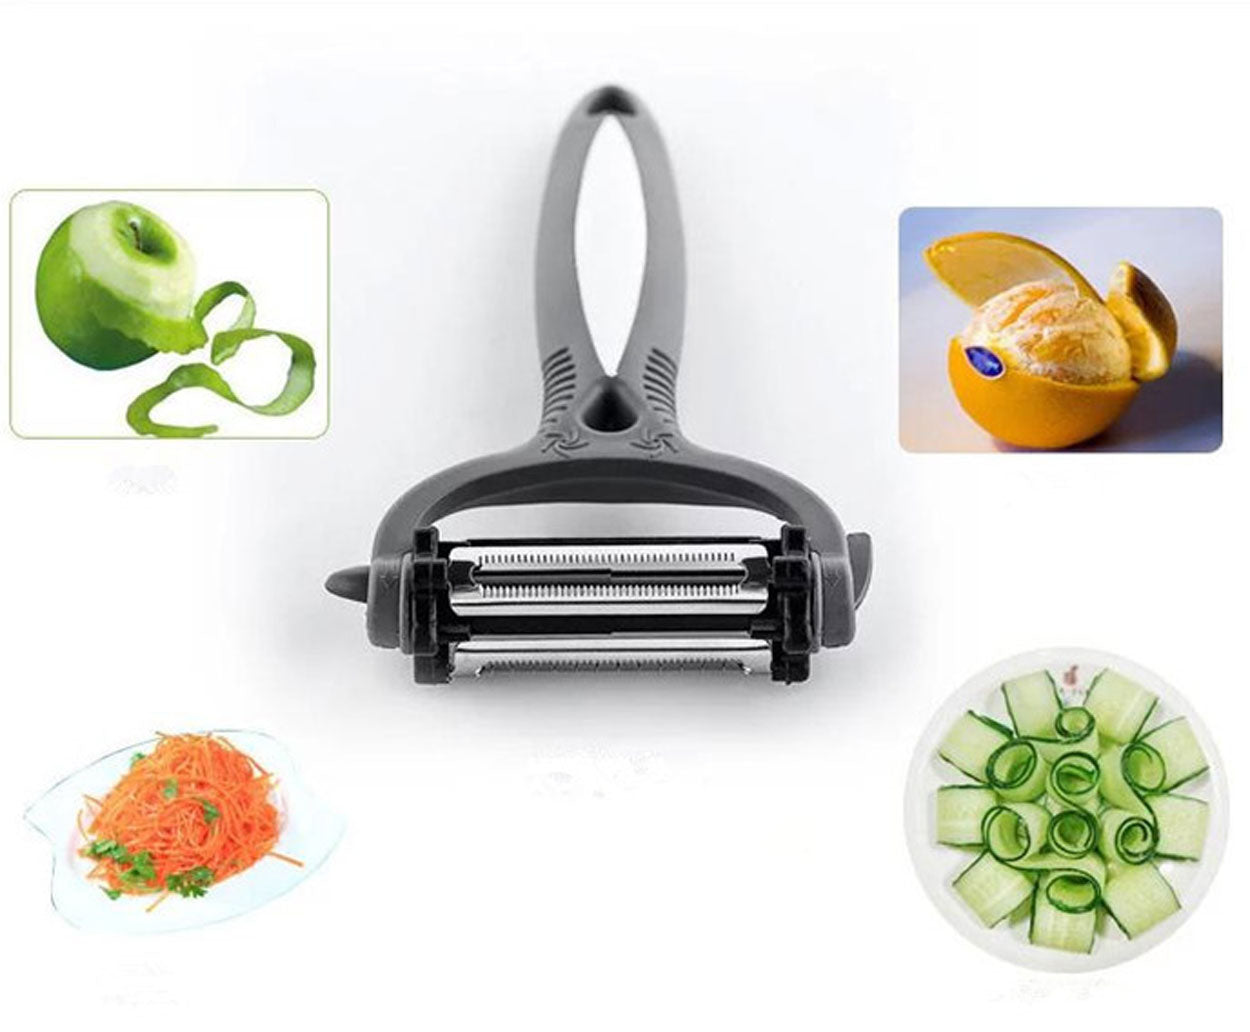 All in One Vegetable Peeler, 3 and 1 Vegetable and Fruit Peeler